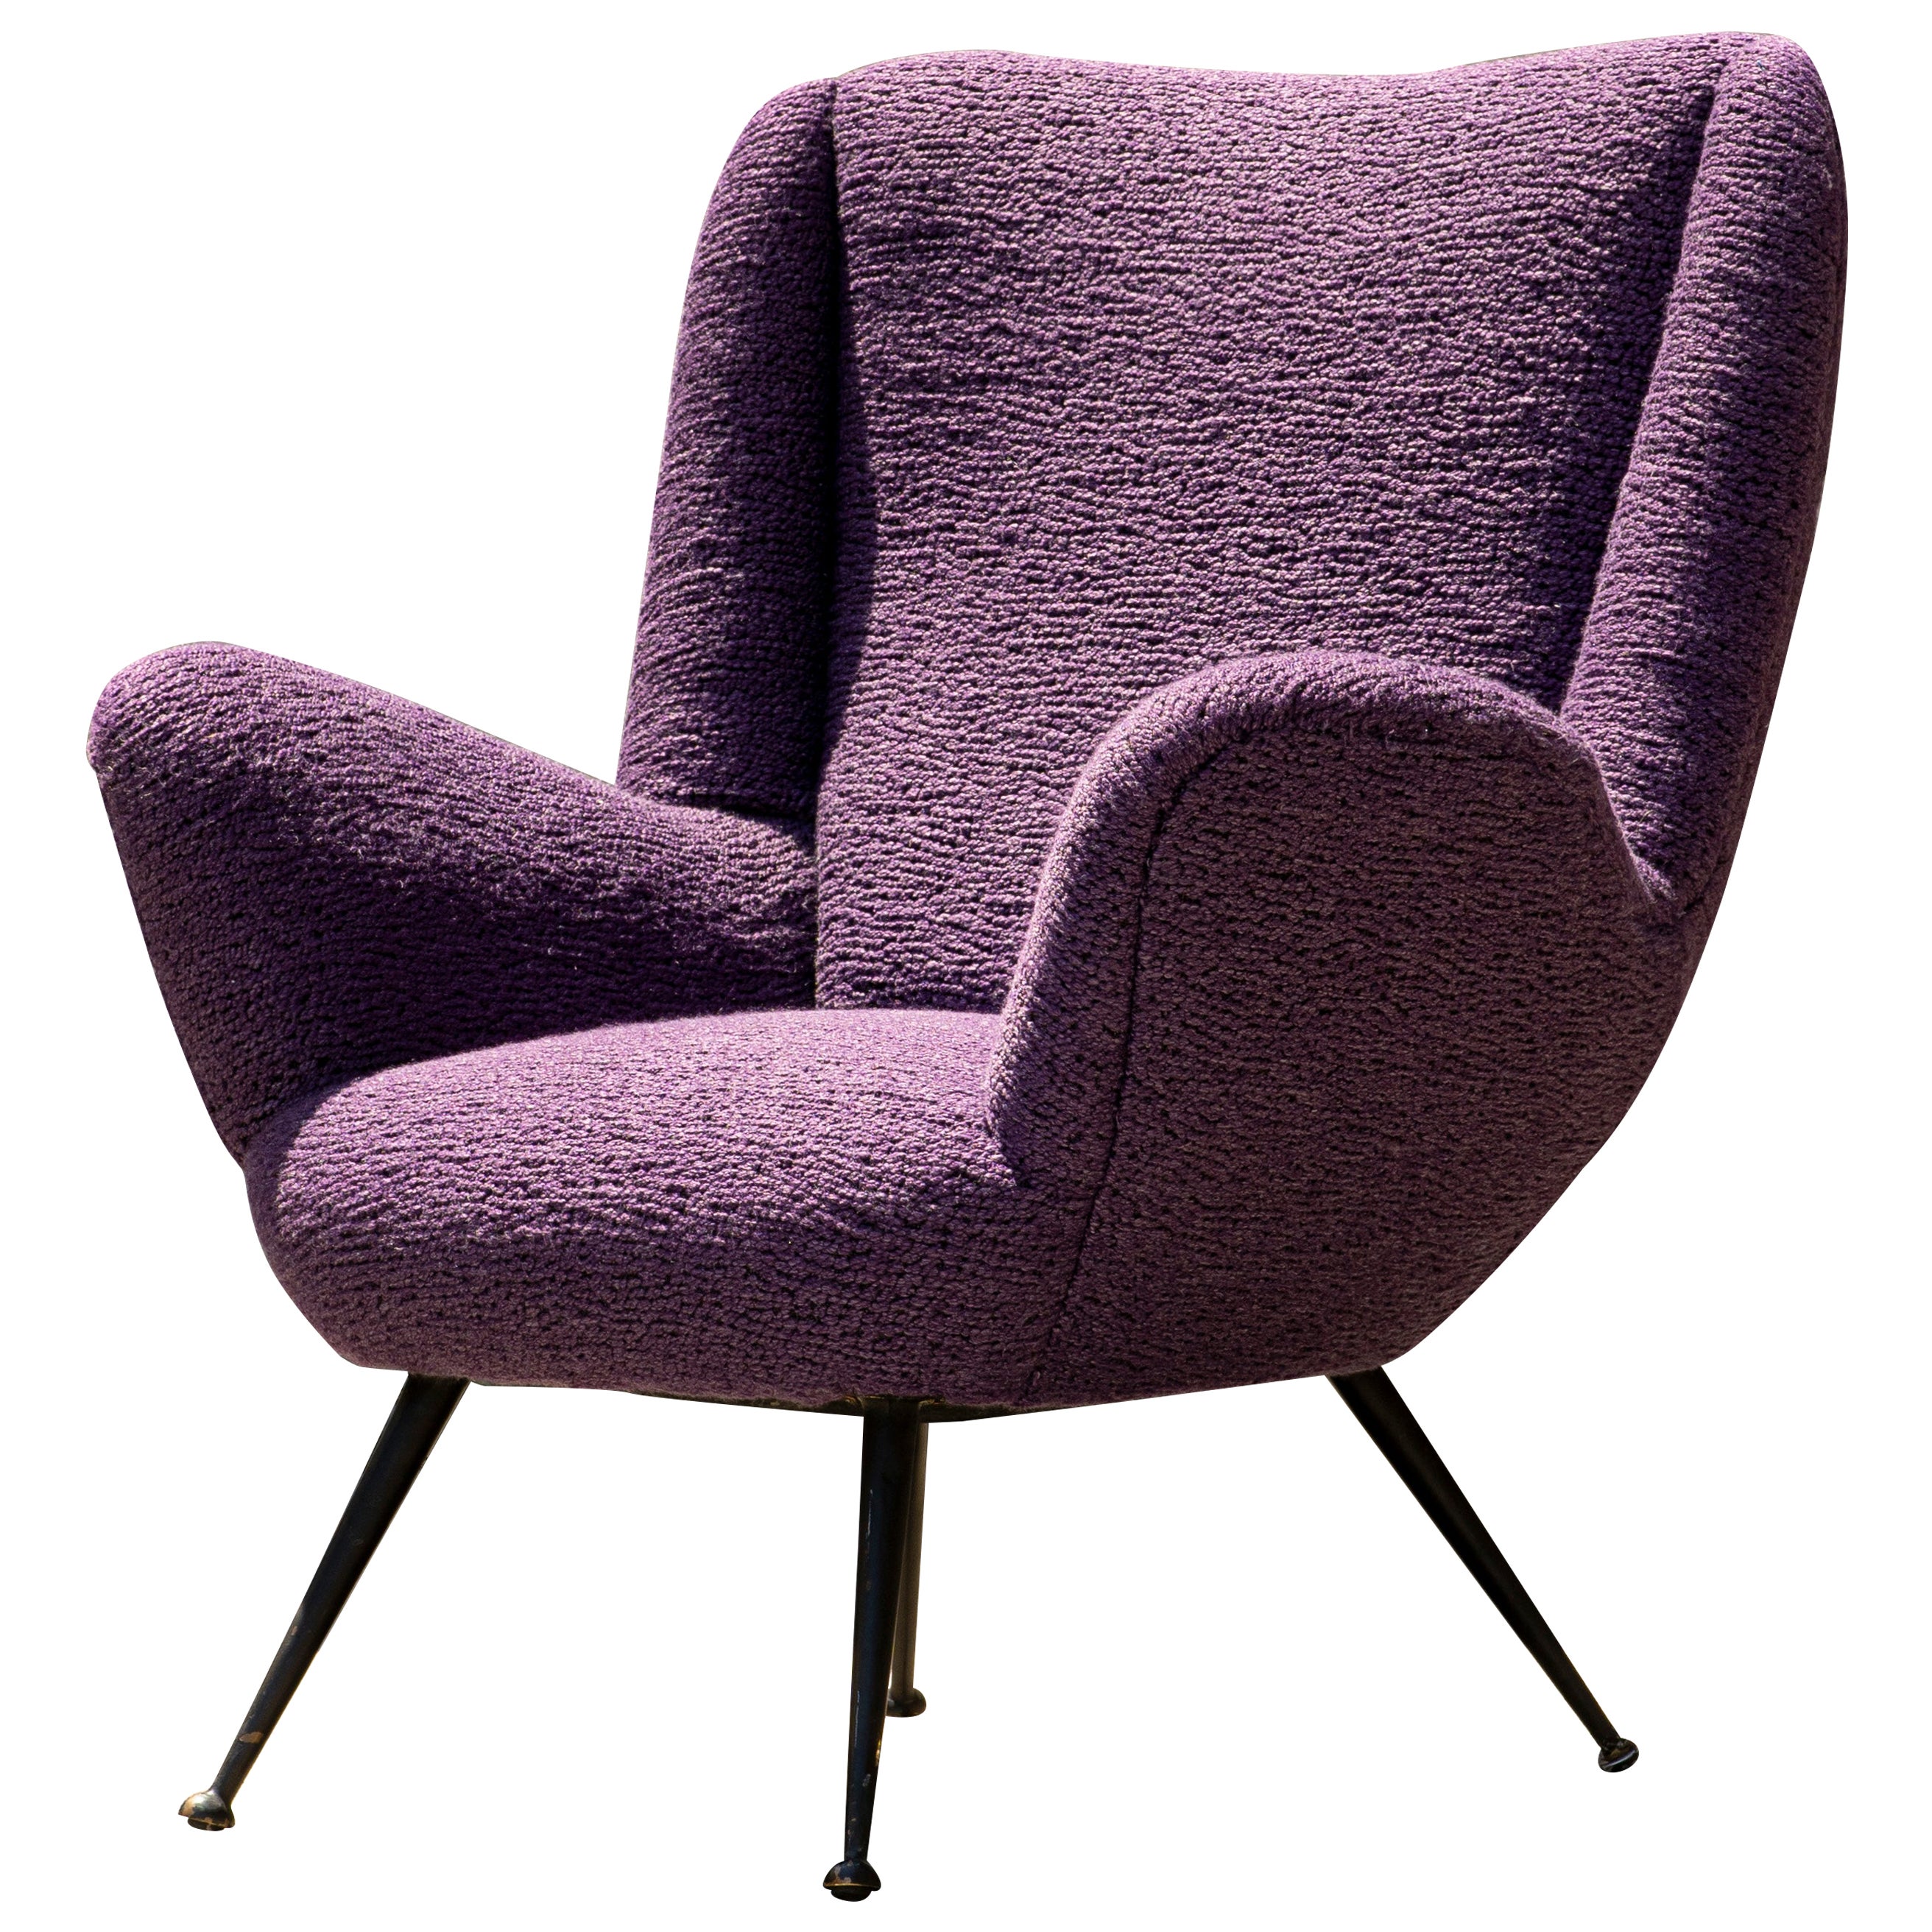 1950s Armchair with Signed Pierre Frey Fabric in Lavender Purple Bouclé For Sale